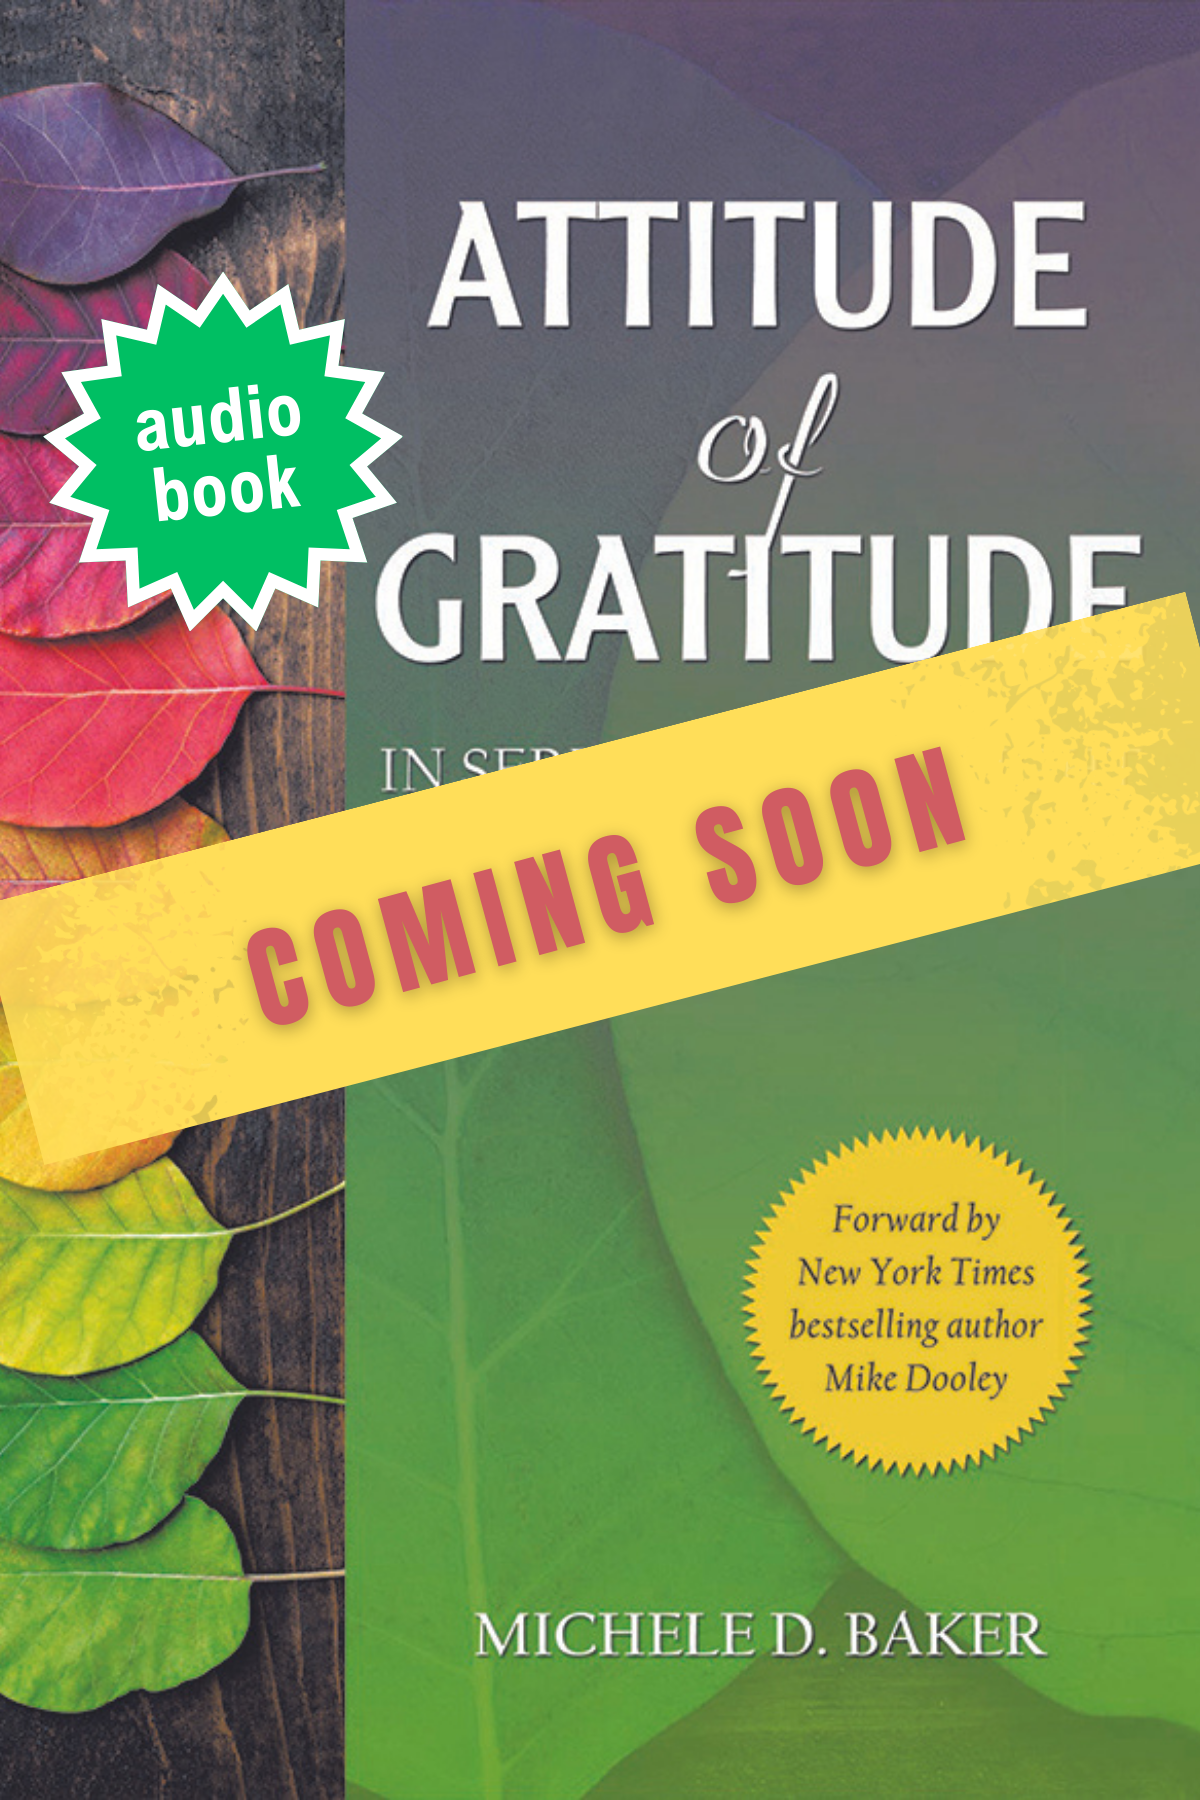 AOG audiobook coming soon (4 x 6 in).png